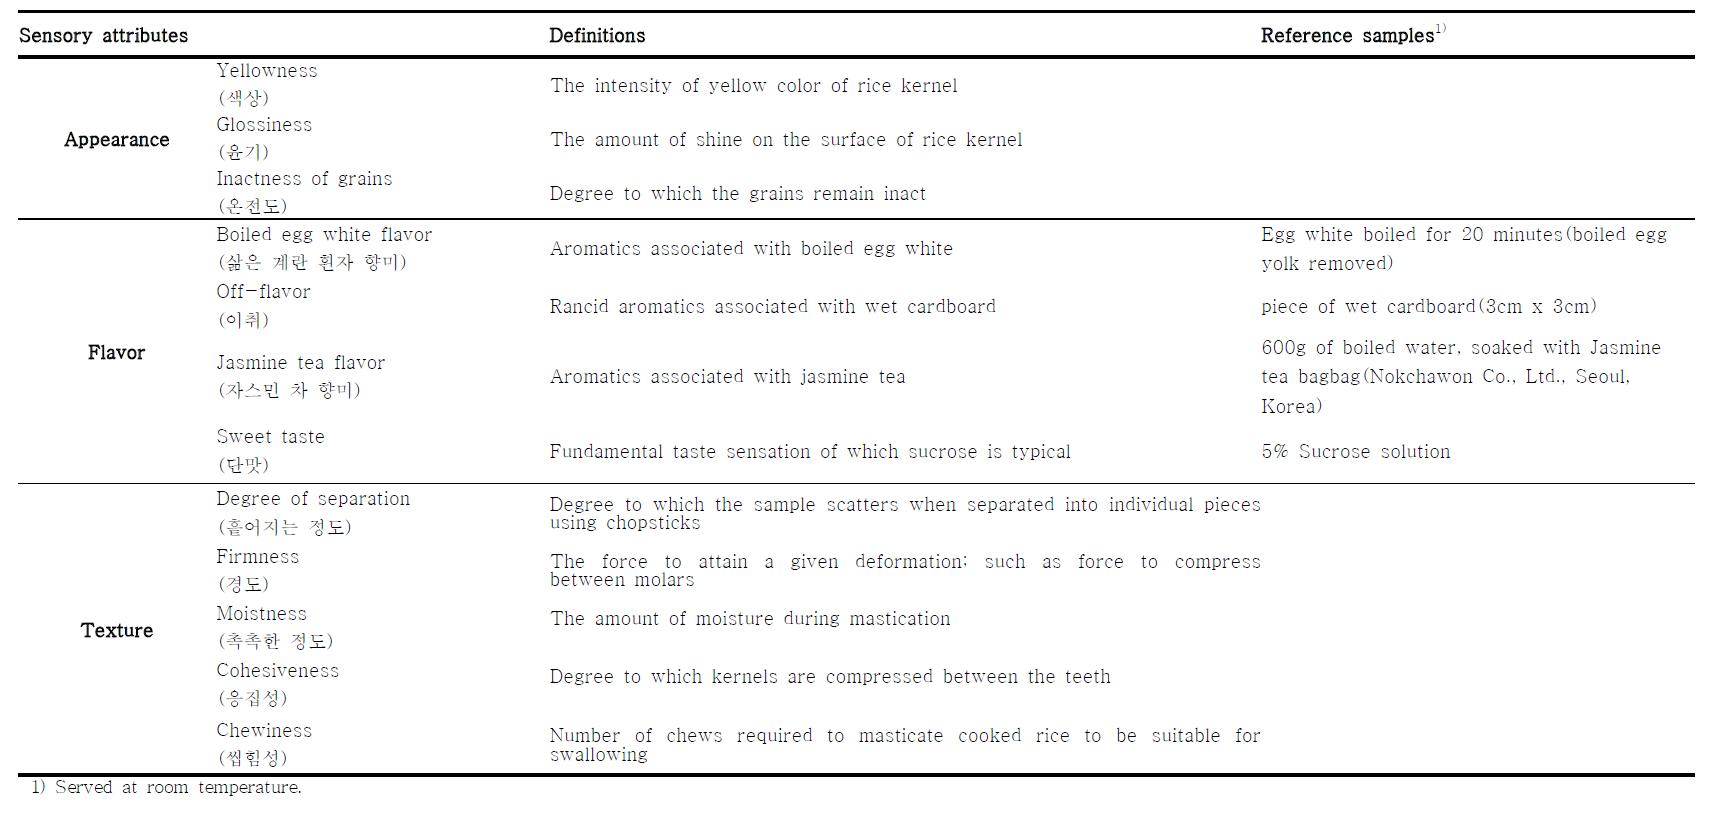 Definitions and reference samples of the sensory attributes of cooked rice samples